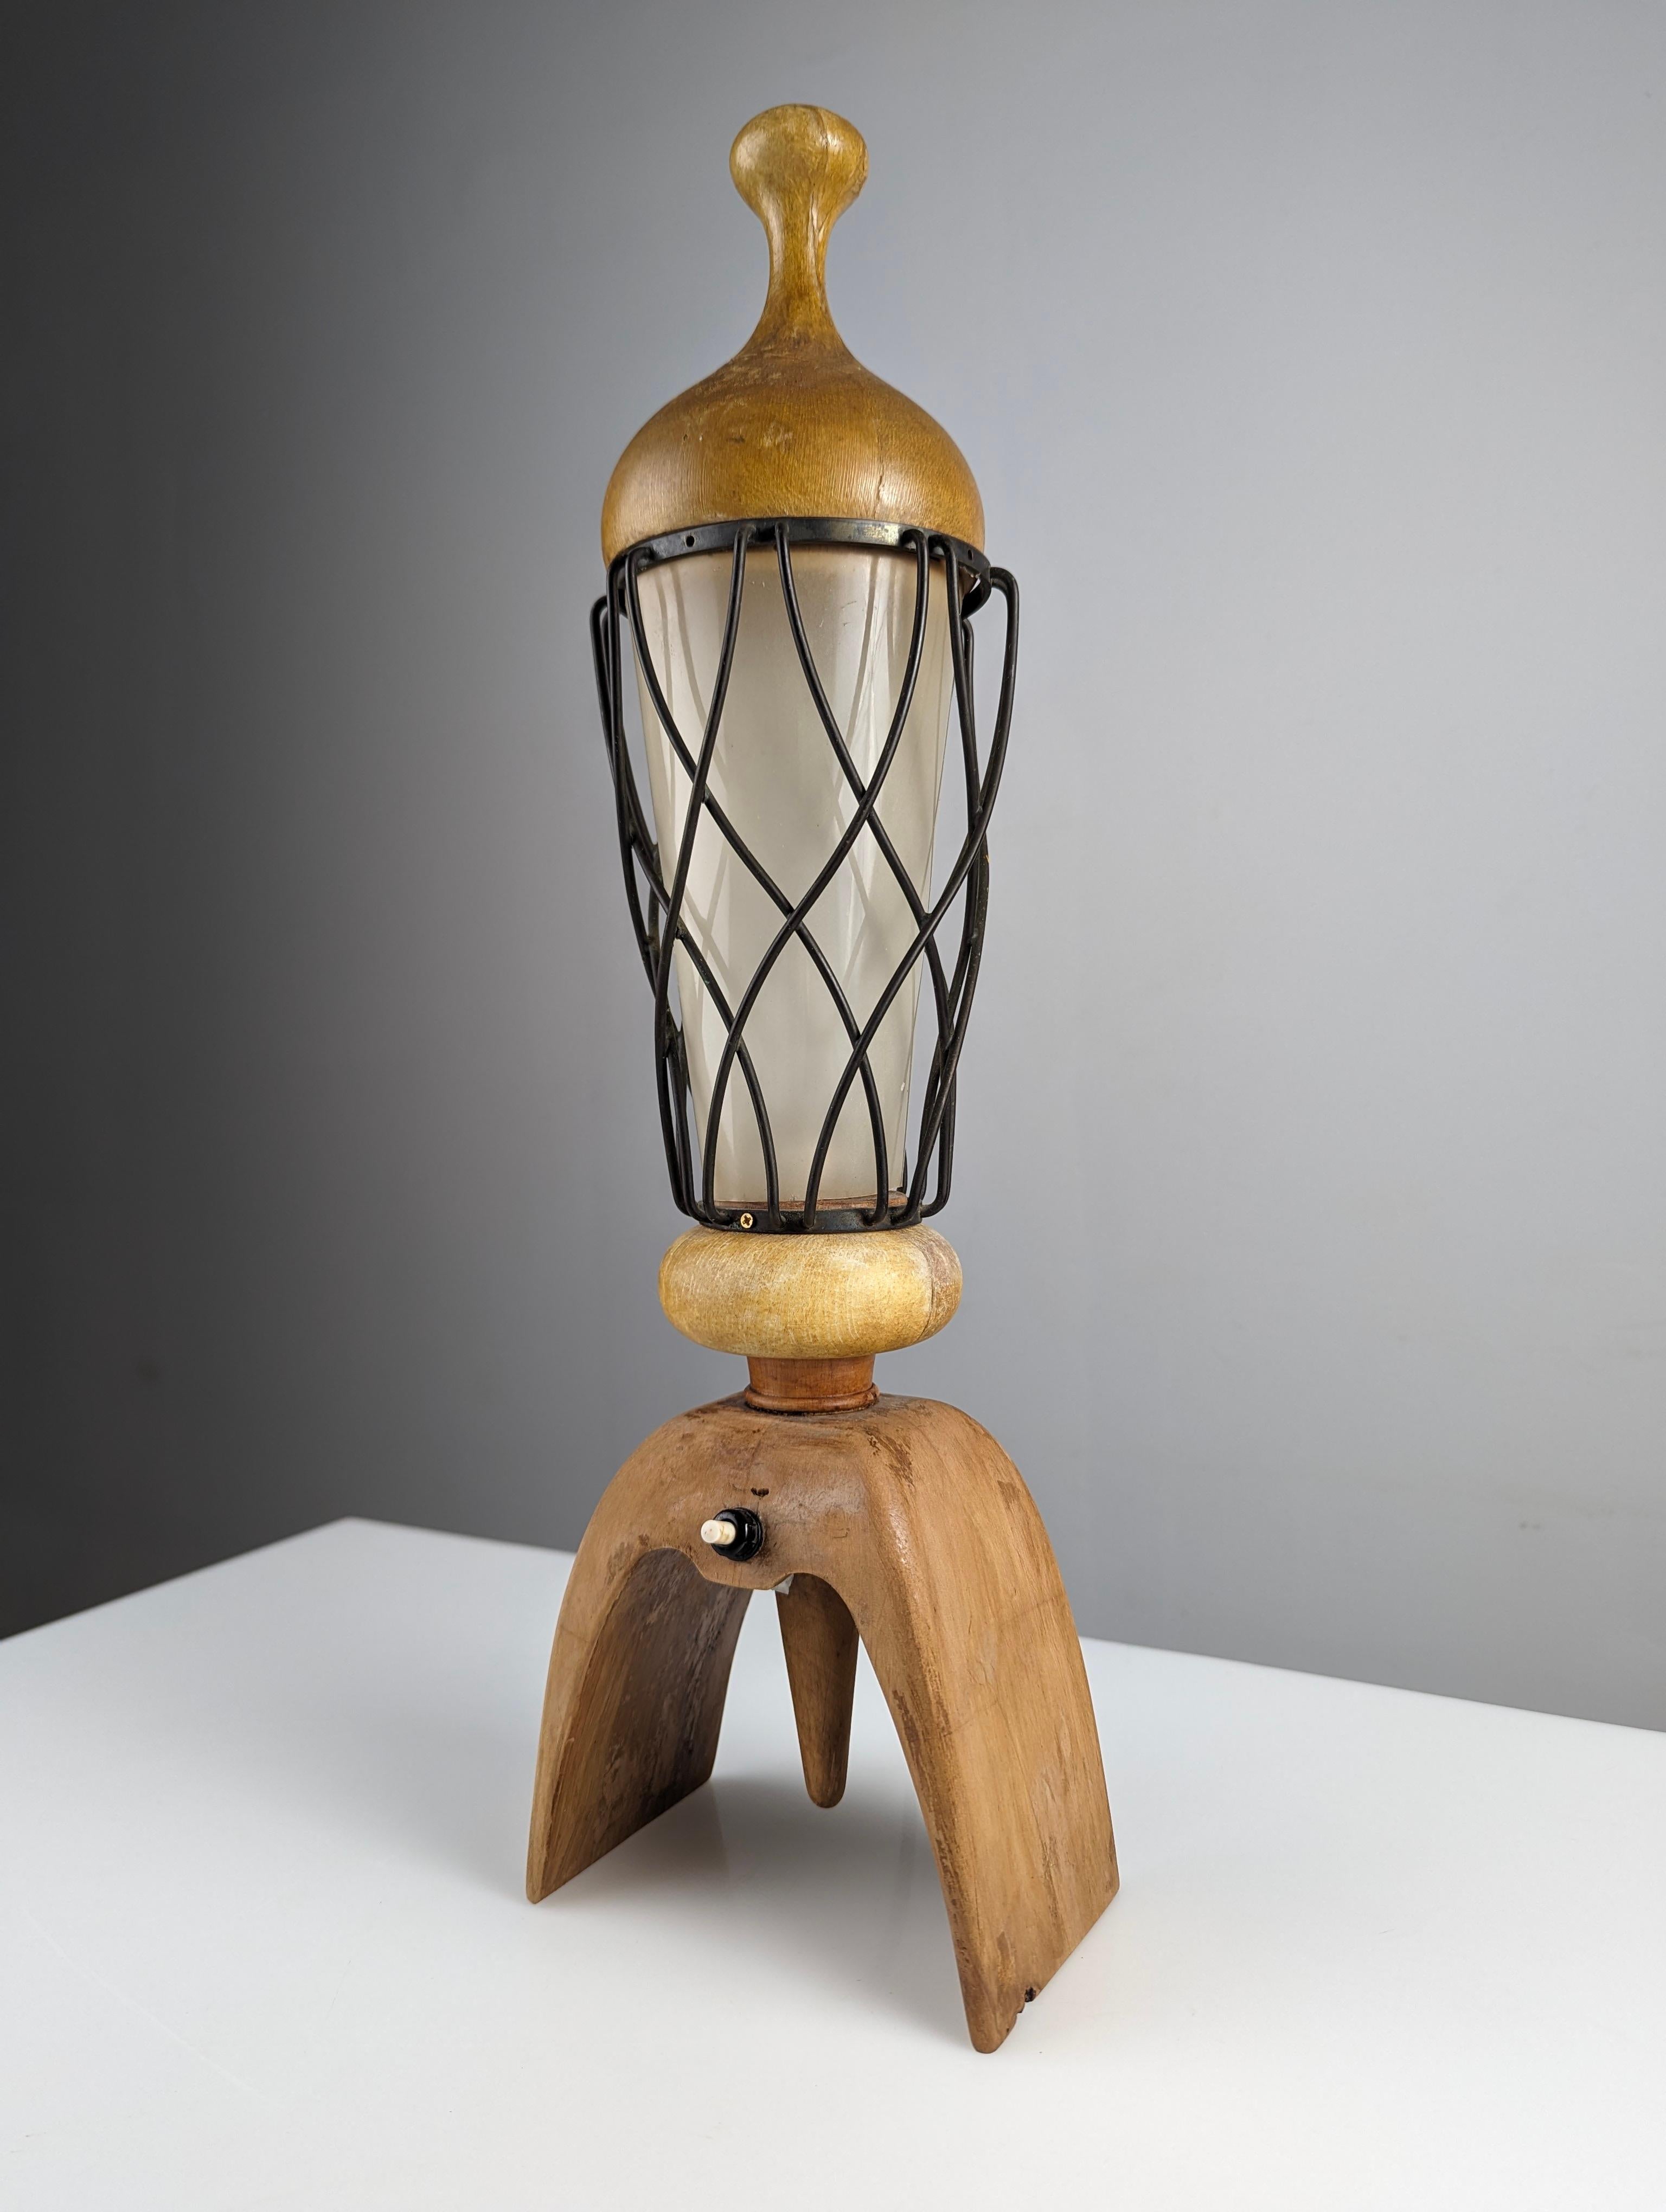 Table lamp by the great Italian designer Aldo Tura. This piece combines wood with curved lines with its characteristic crossed metal lantern protecting the acrylic cylinder. A beautiful work of Aldo Tura's peculiar Italian design in the 60s.

